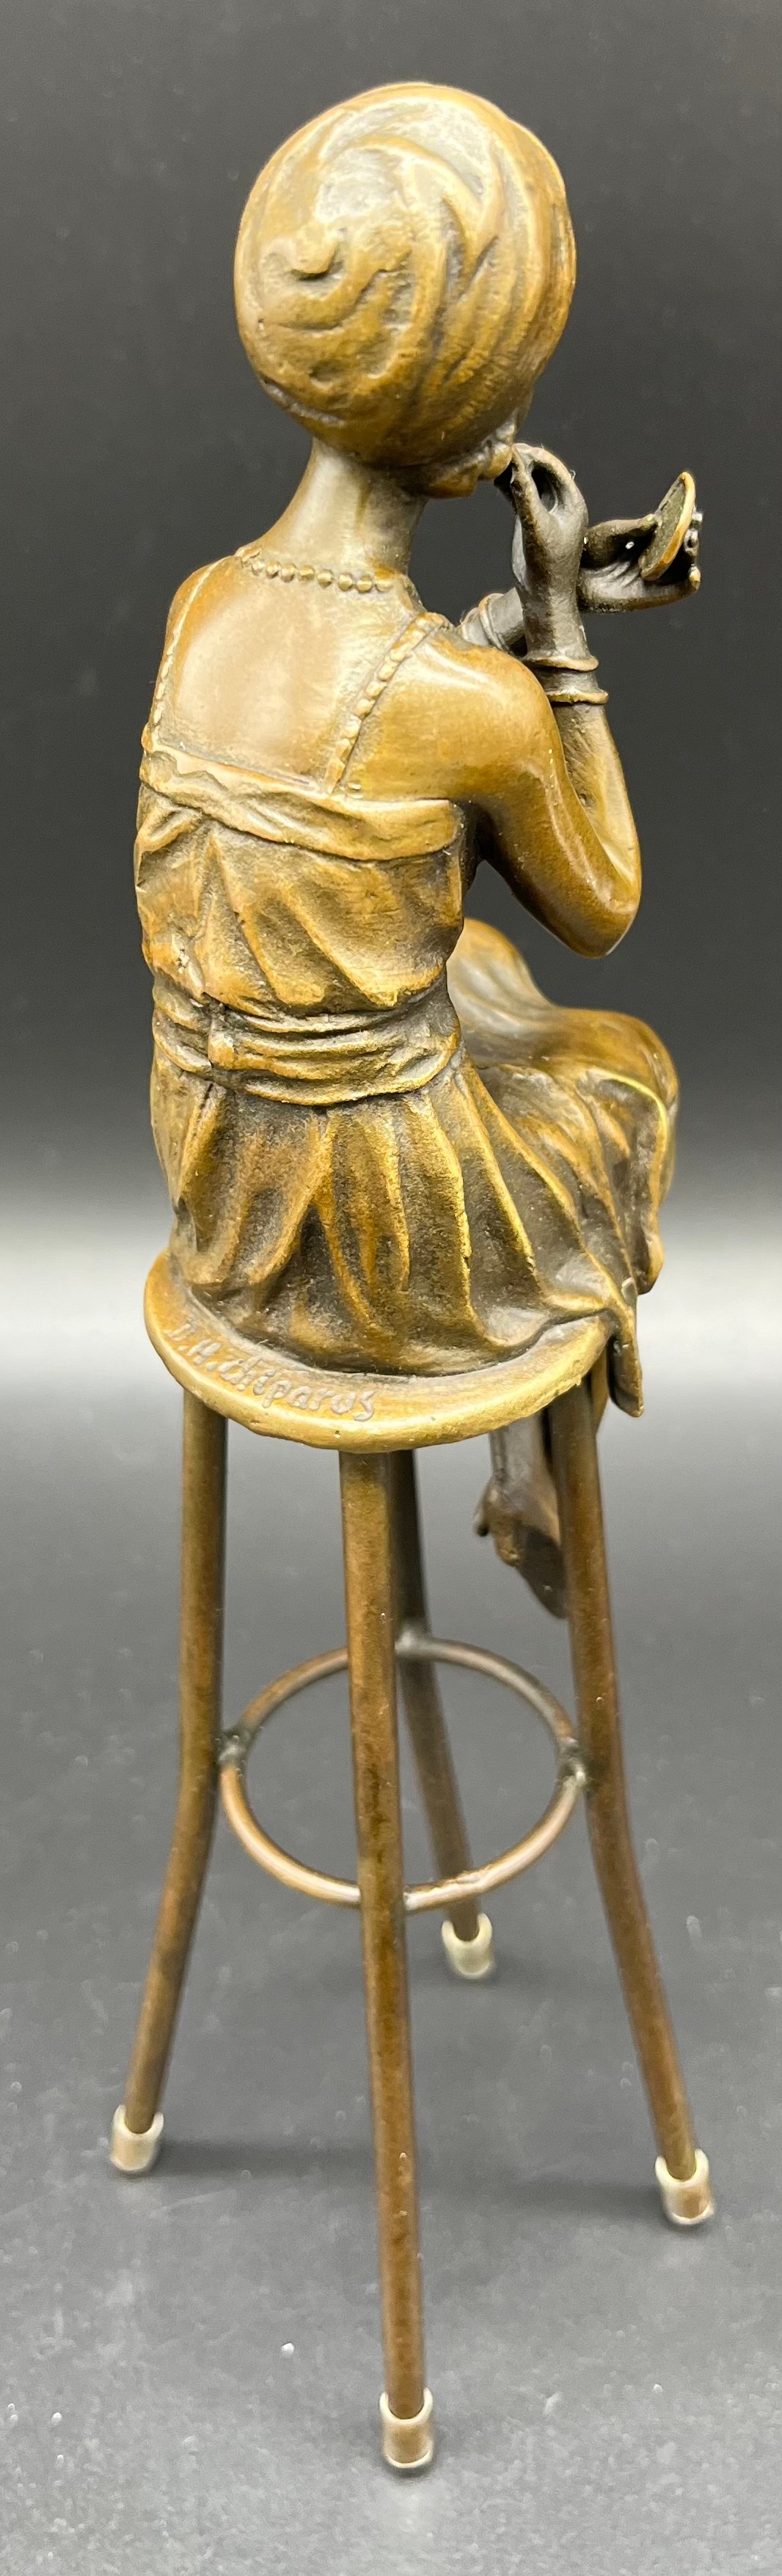 Bronze Statue of an Art Nouveau lady seated on a stool, Signed D.H. Chiparus. [27cm high] - Image 2 of 4